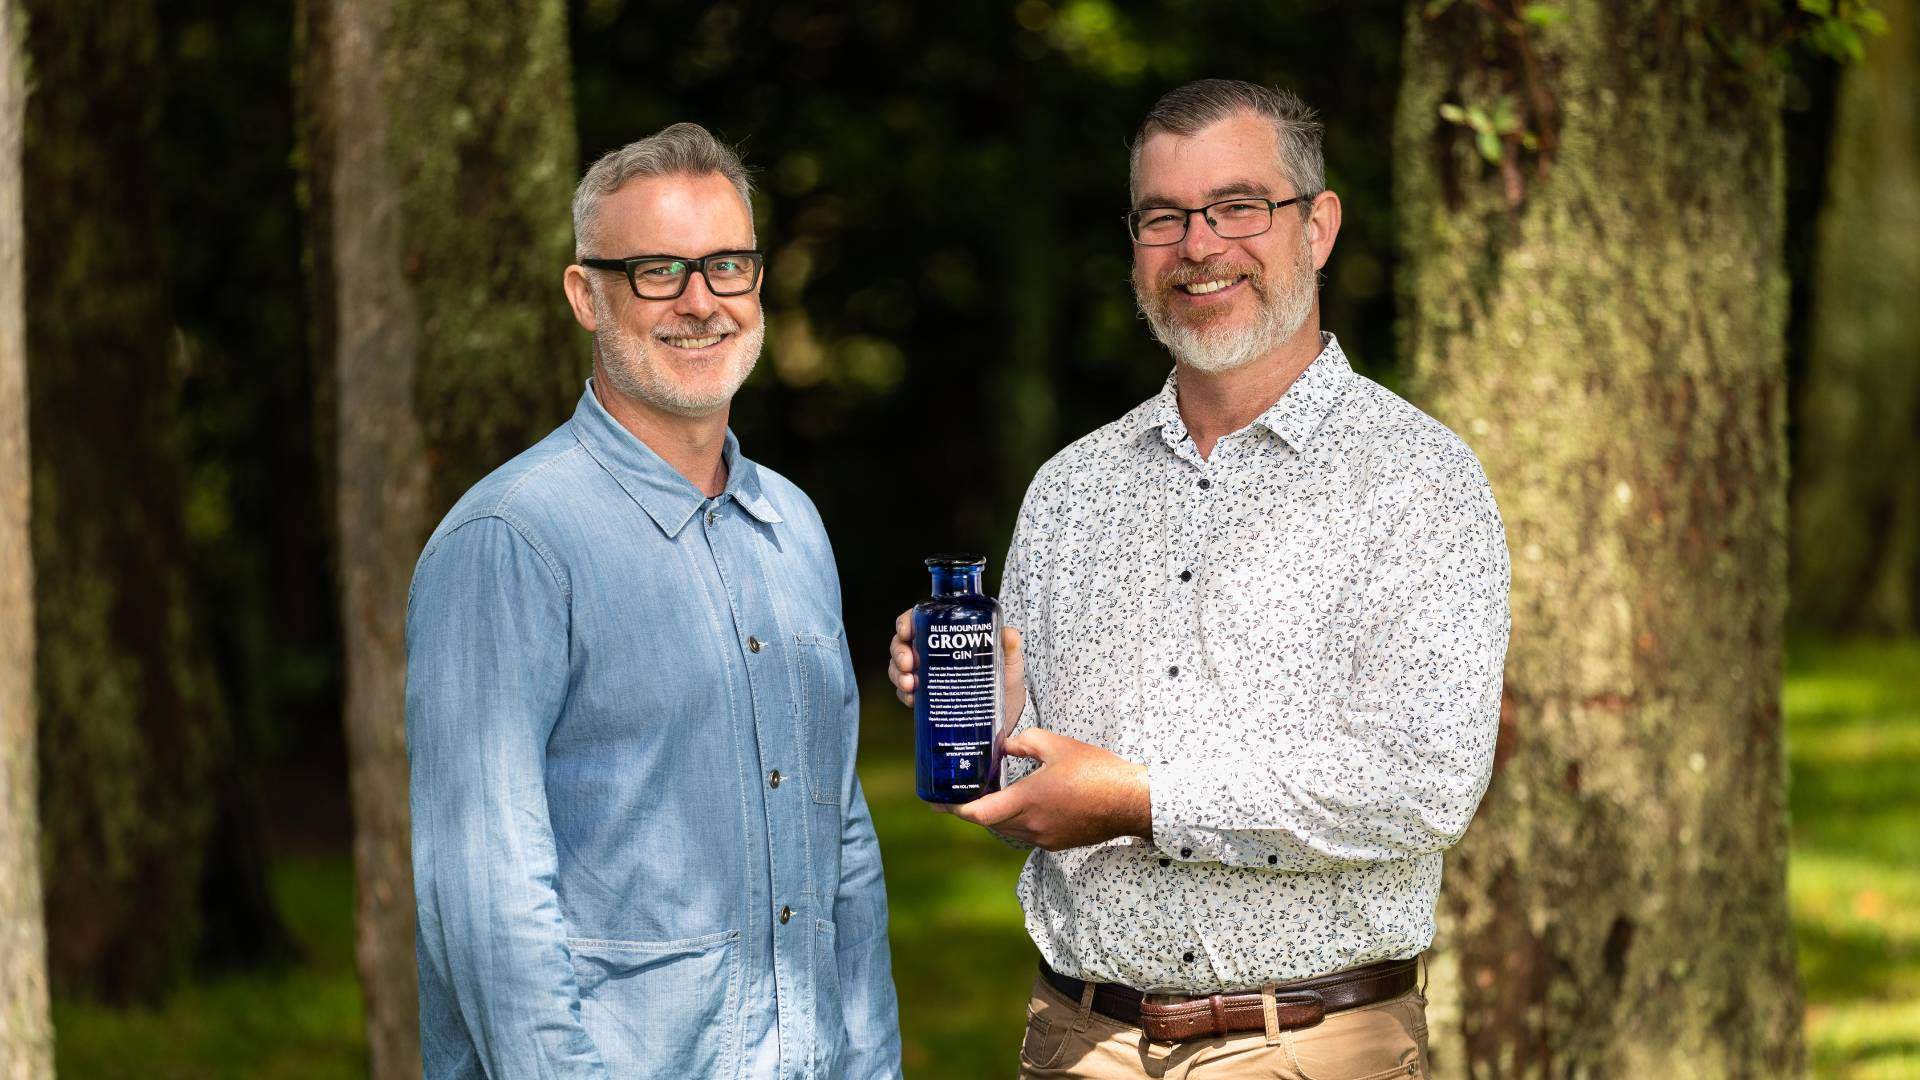 The Blue Mountains Botanic Garden Has Released a Gin with All Profits Going to Bushfire Recovery